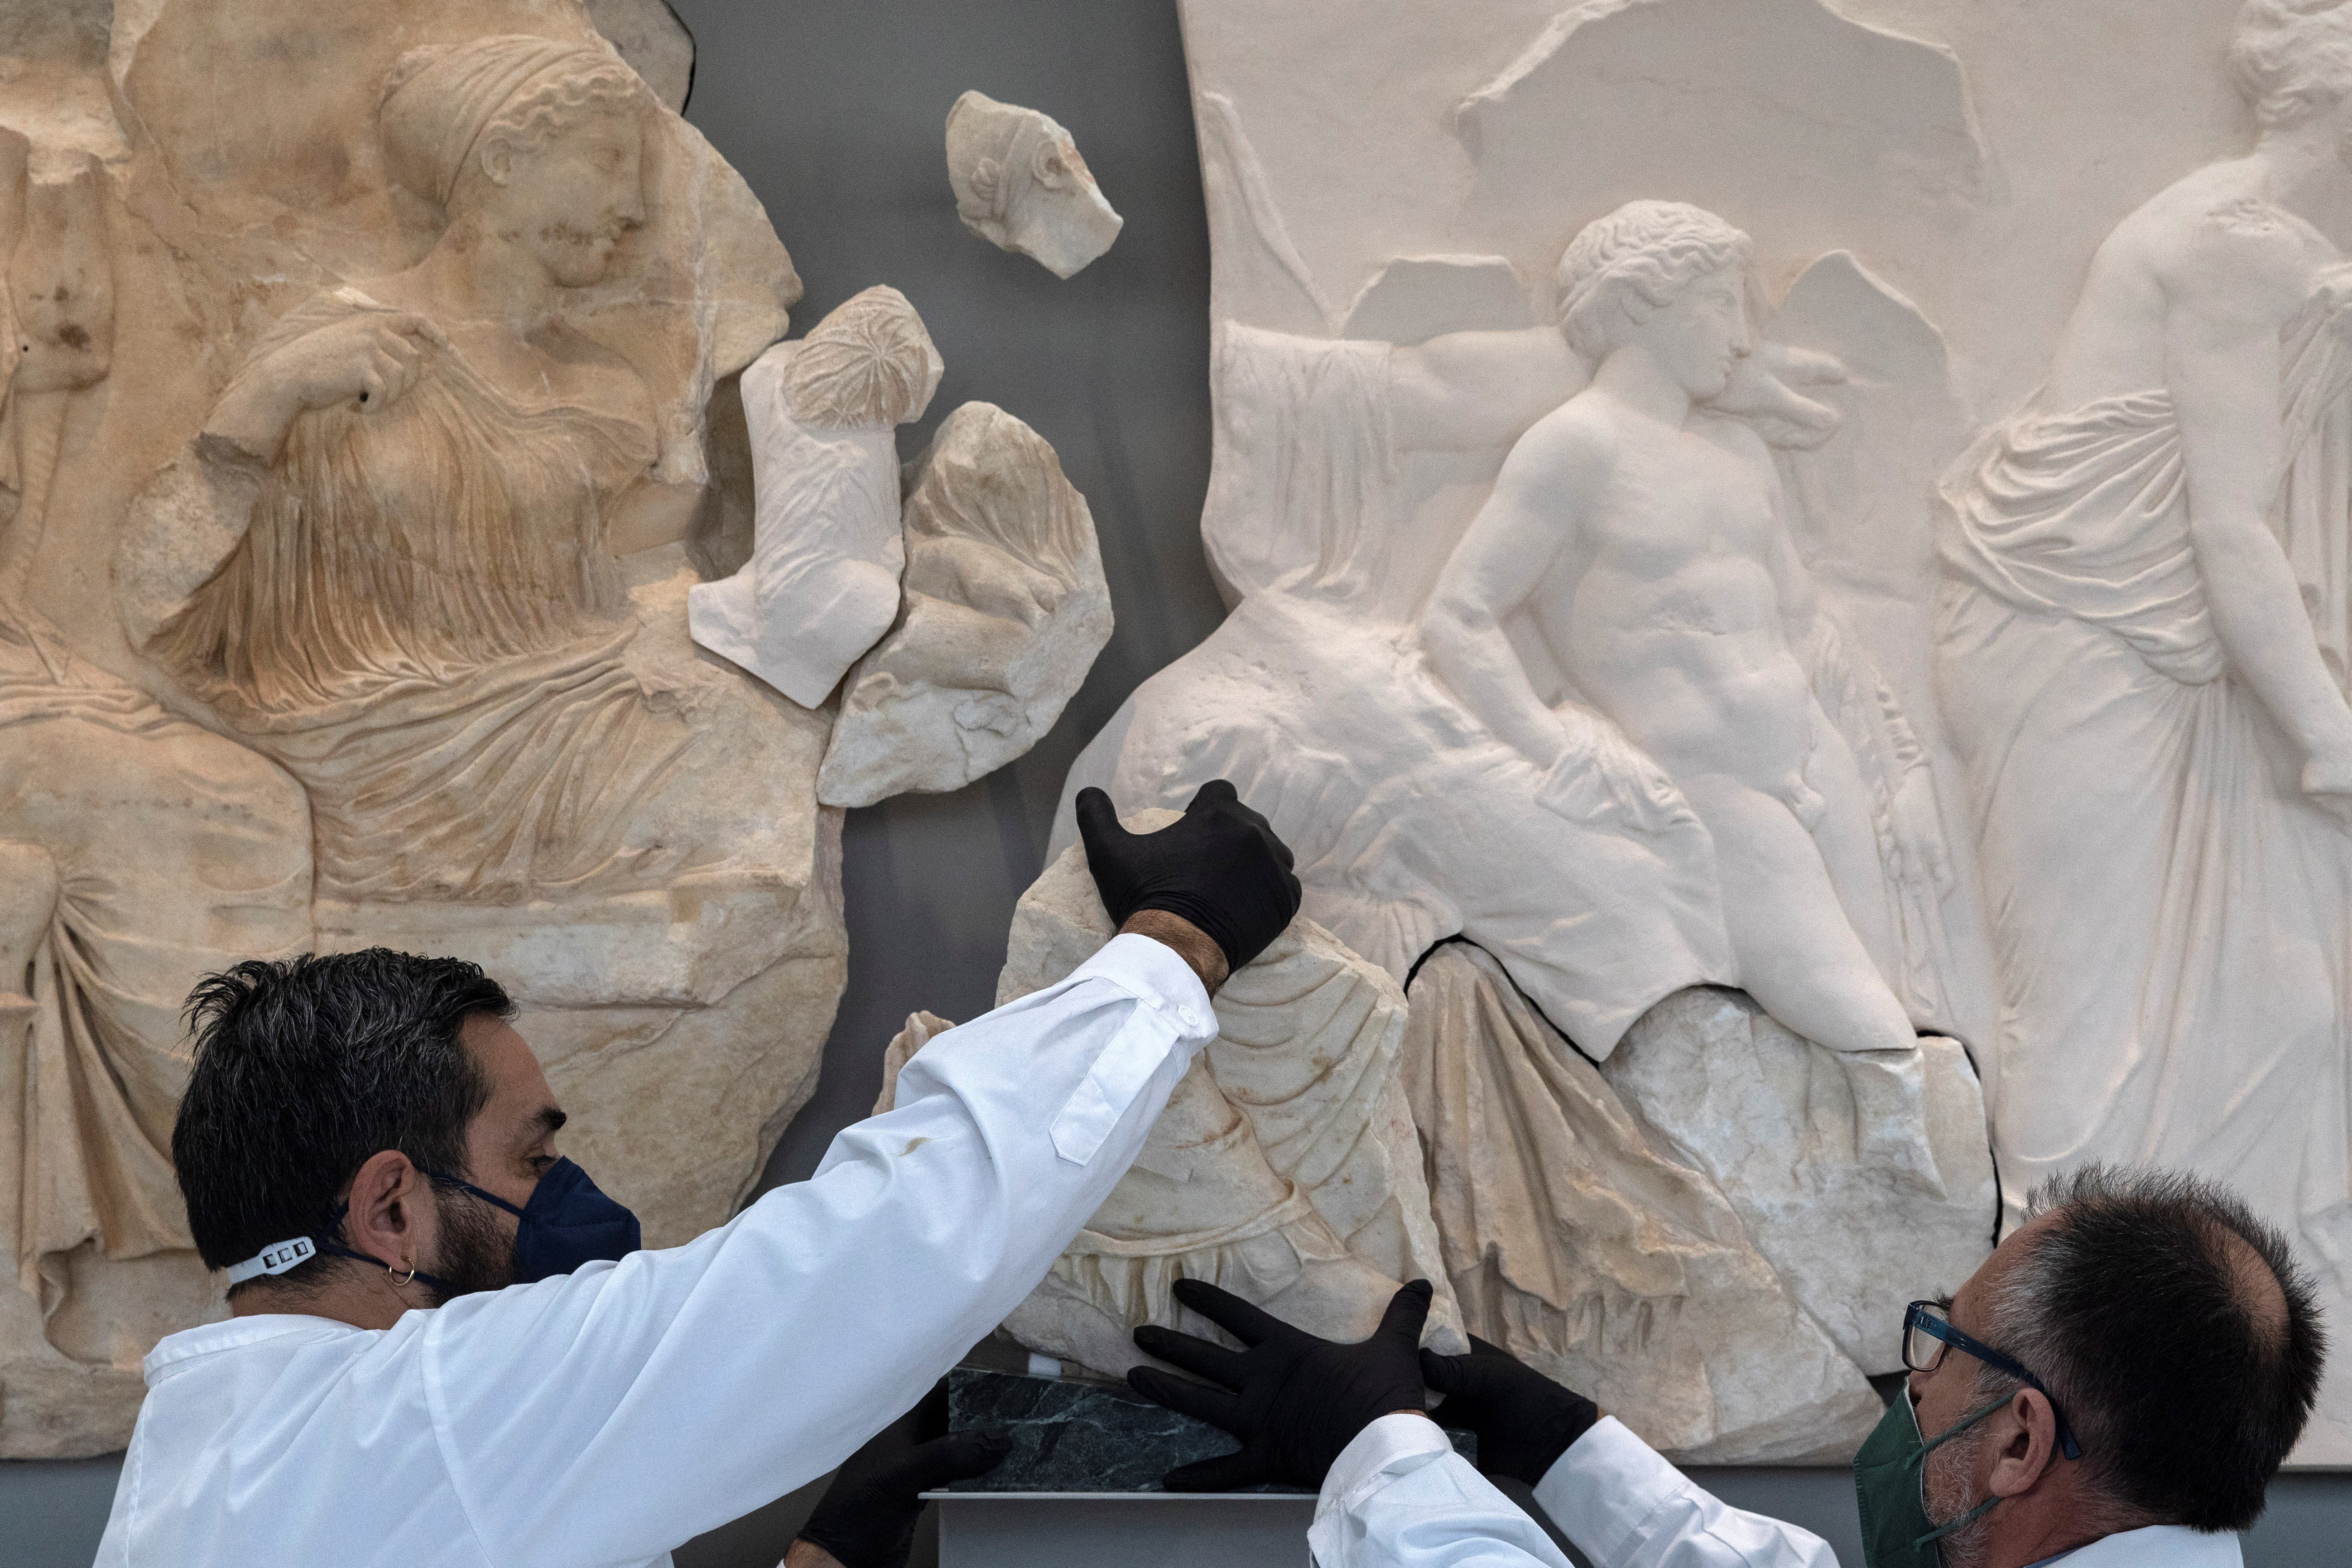 Two conservators hold a Parthenon fragment, on loan from the Antonino Salinas Regional Archaeological Museum of Palermo, in the Parthenon Gallery at the Acropolis Museum in Athens